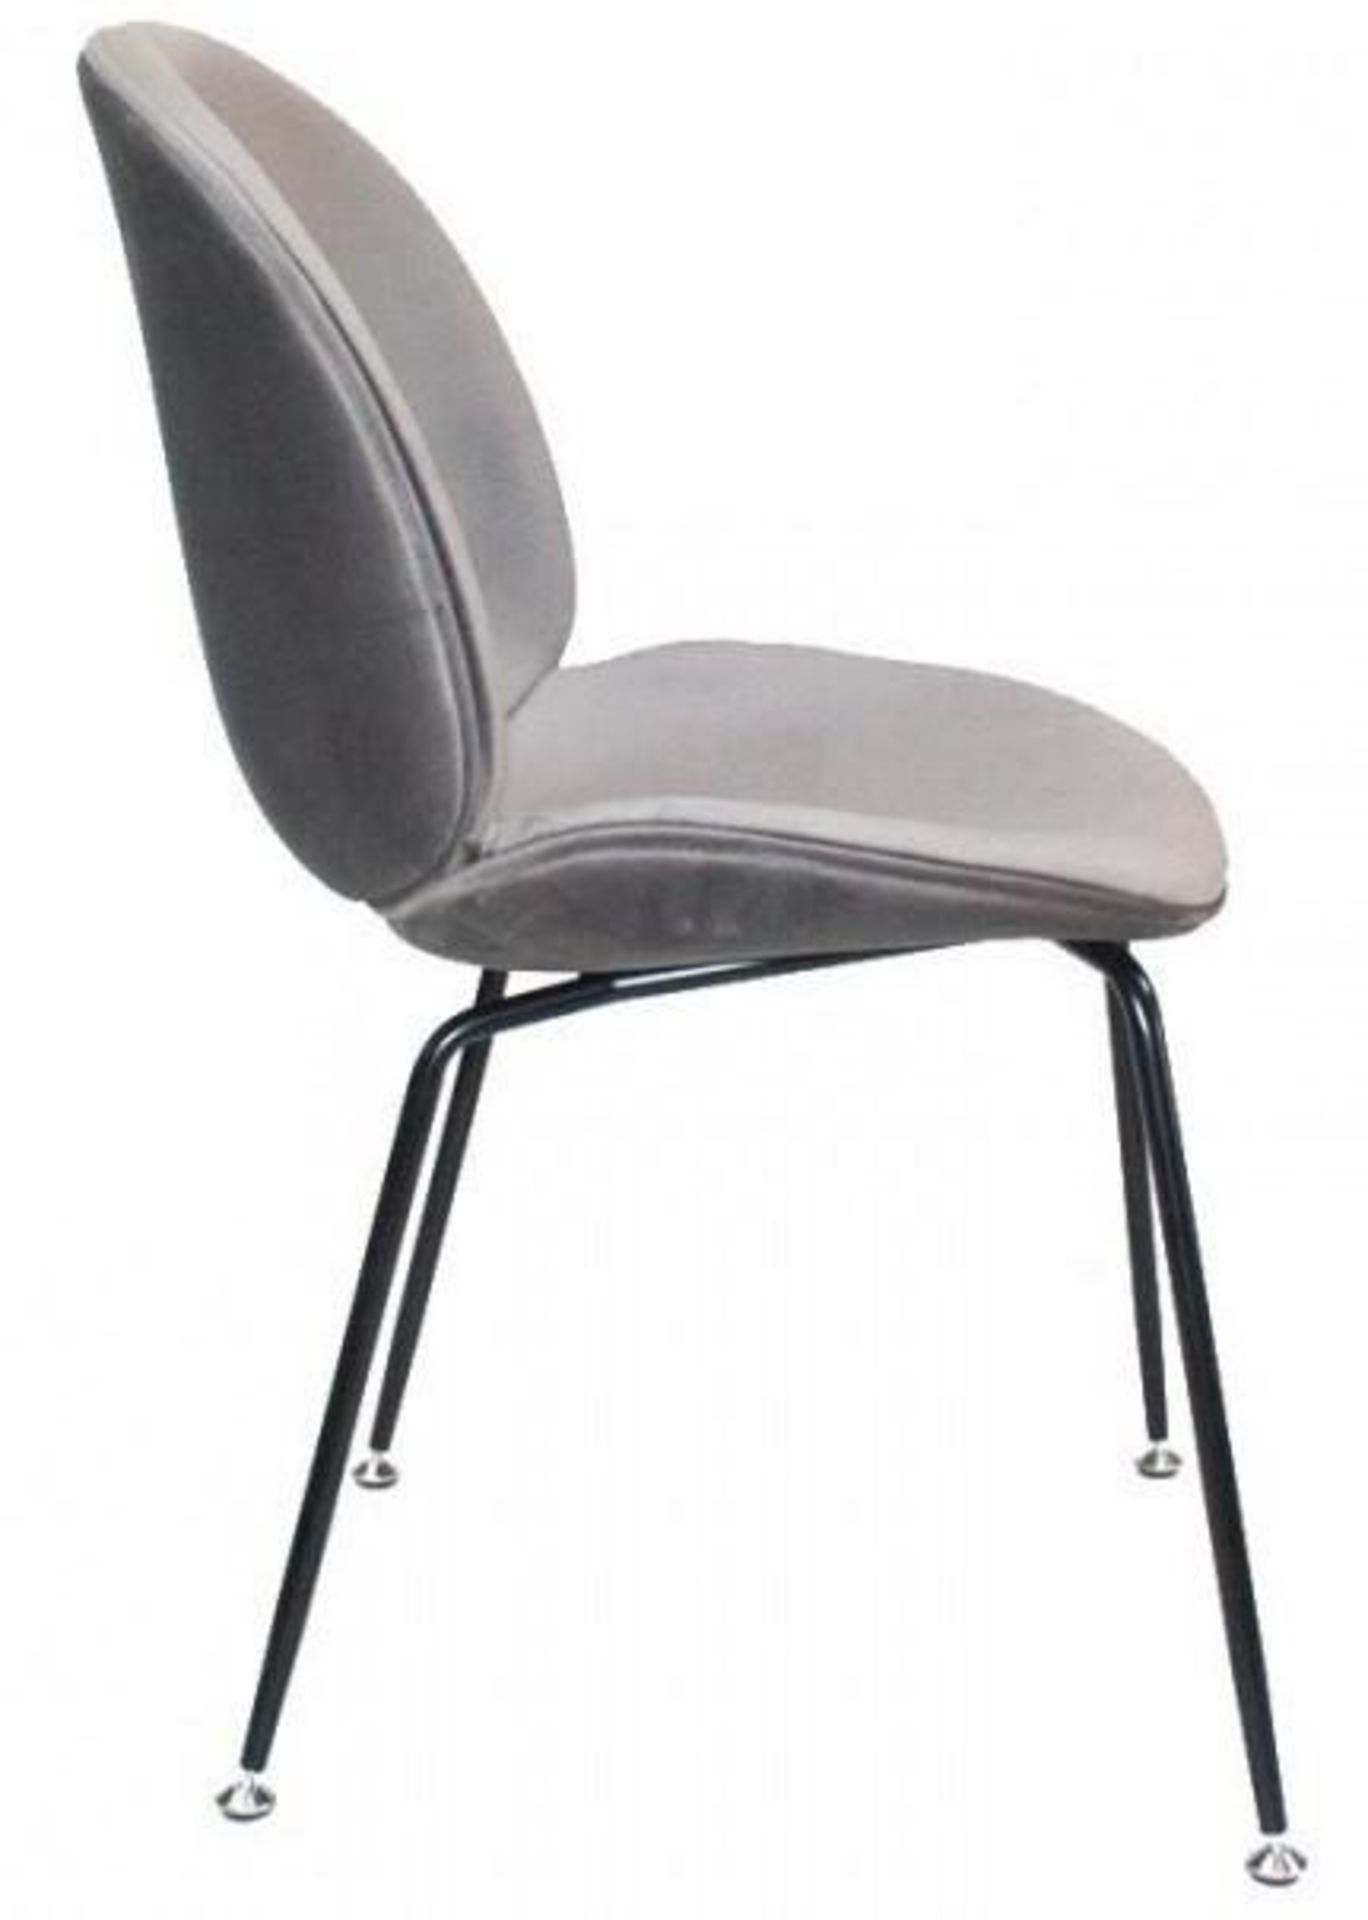 2 x GRACE Upholstered Contemporary Dining Chairs In Grey Velvet - Dimensions: W48 x D50 x H85 cm - B - Image 3 of 3